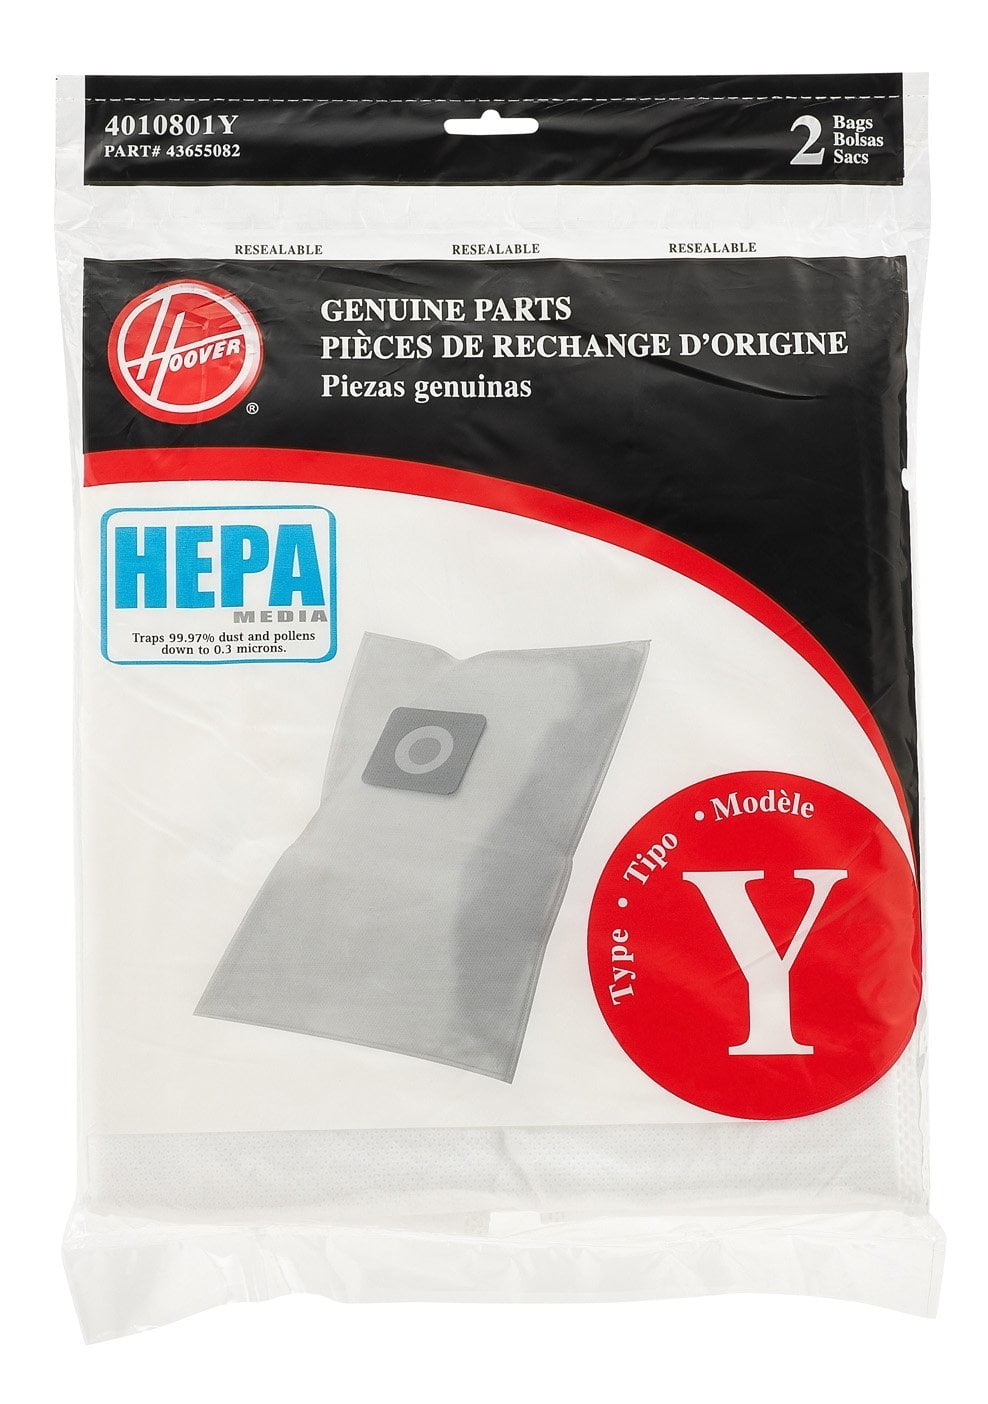 Style Z 3 Pack Replacement Vacuum Bags for Hoover AH15016 